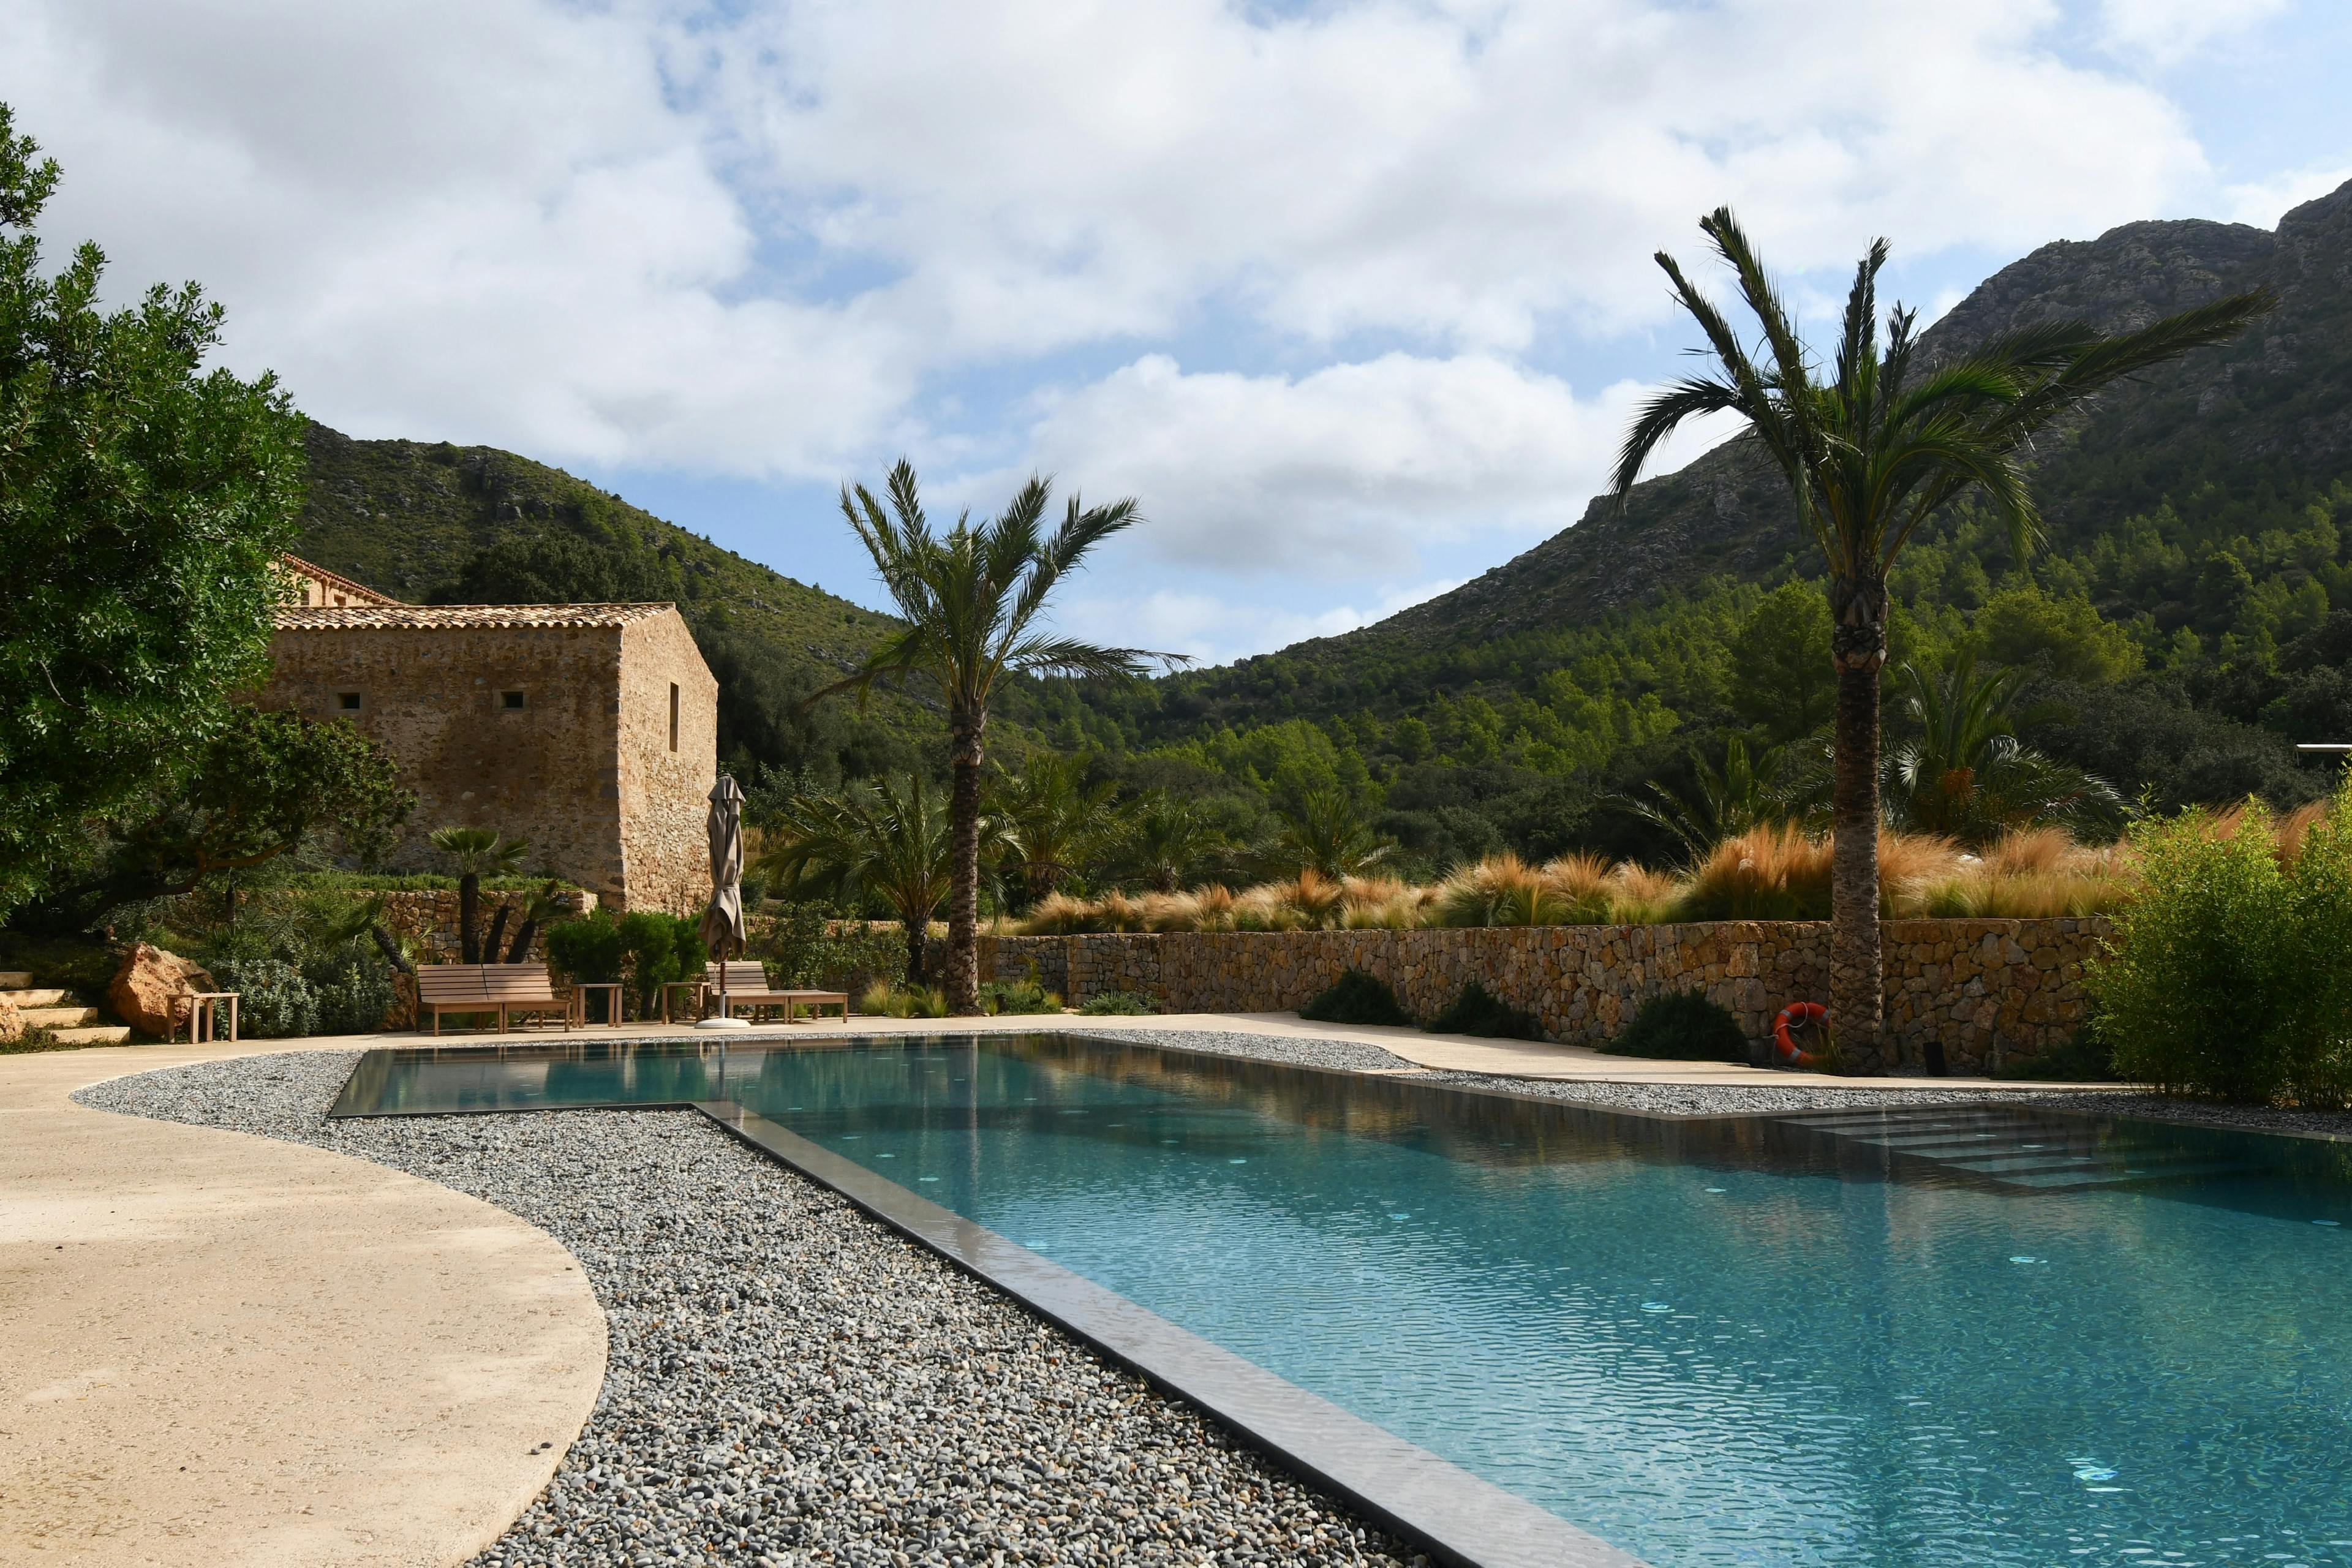 This mediterranean stone terrace is surrounded by the green of the mountains and a little stone wall. It has an embedded Pool and two palm trees.